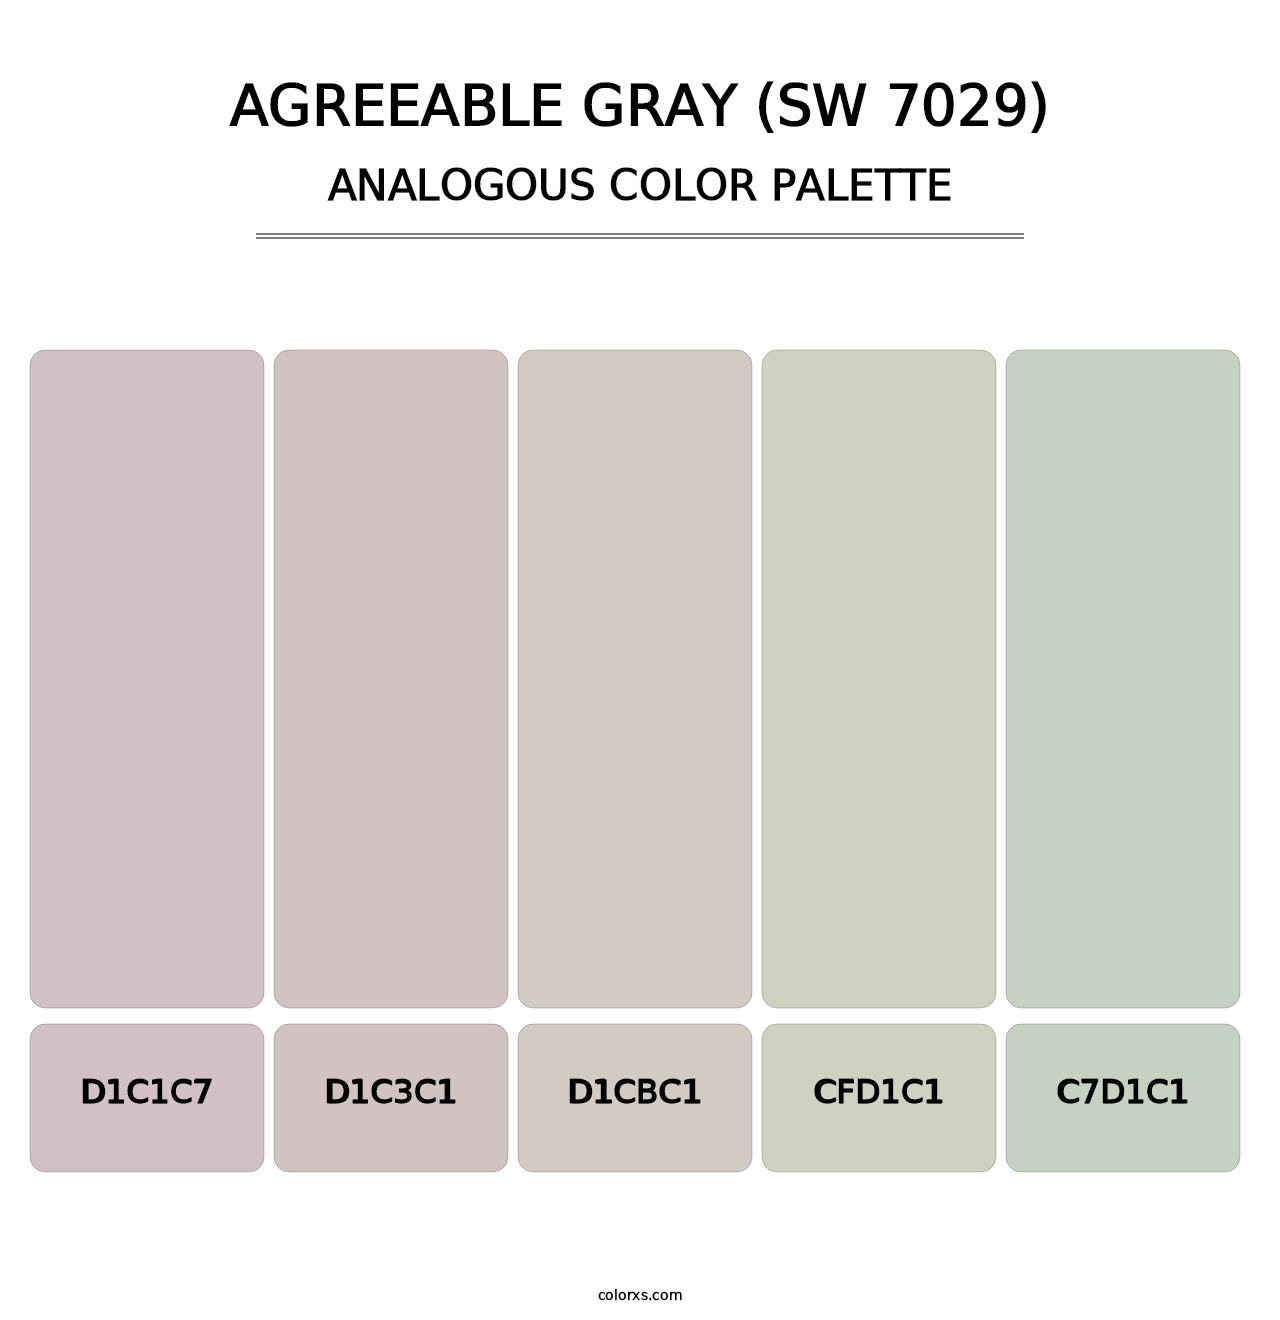 Agreeable Gray (SW 7029) - Analogous Color Palette